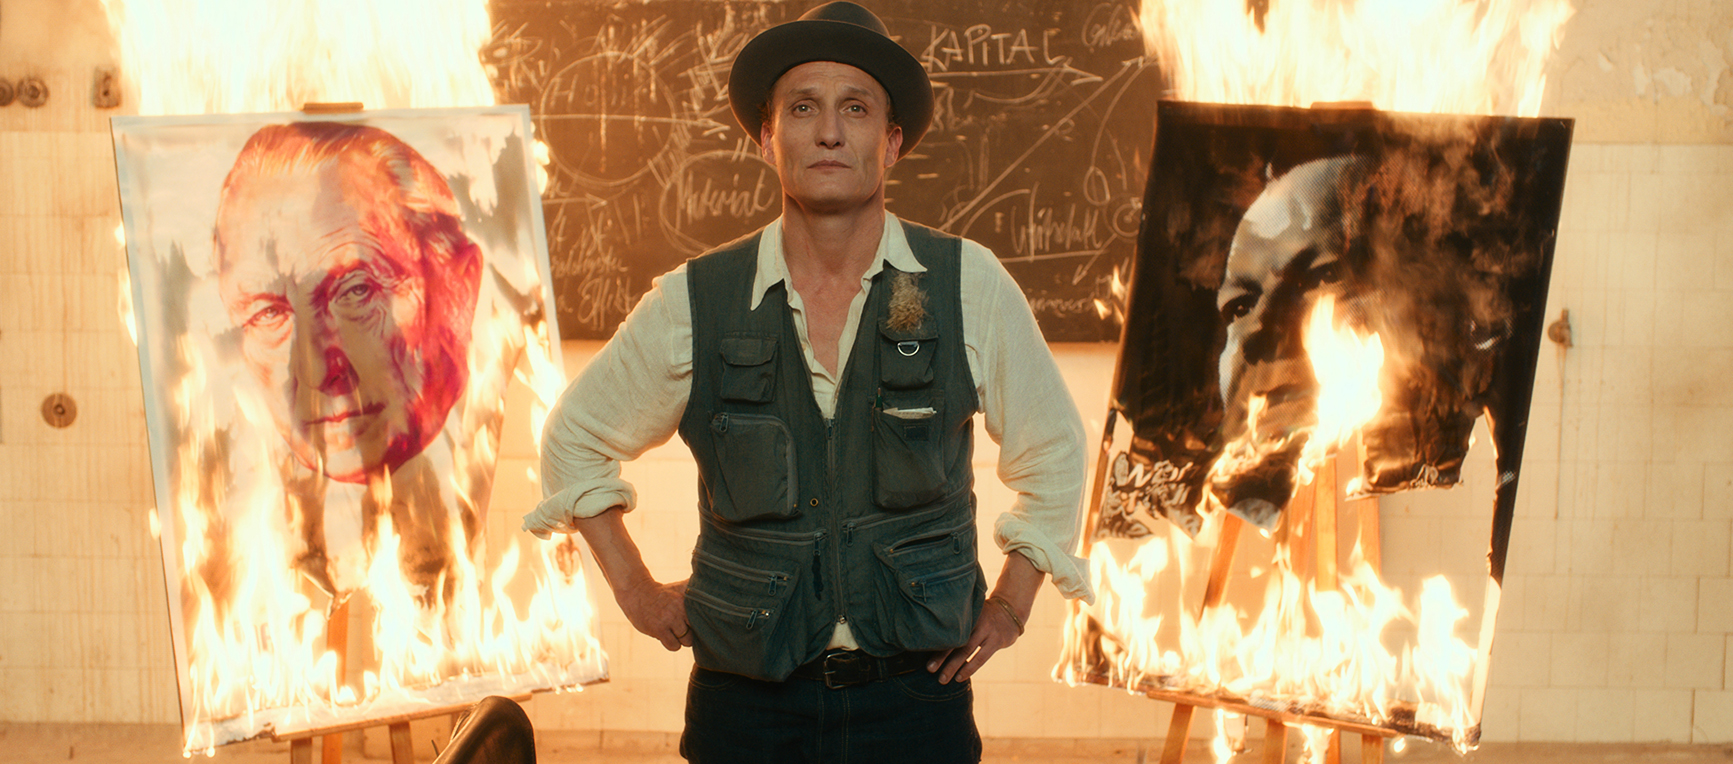 Man stands infront of two paintings on fire in Never Look Away